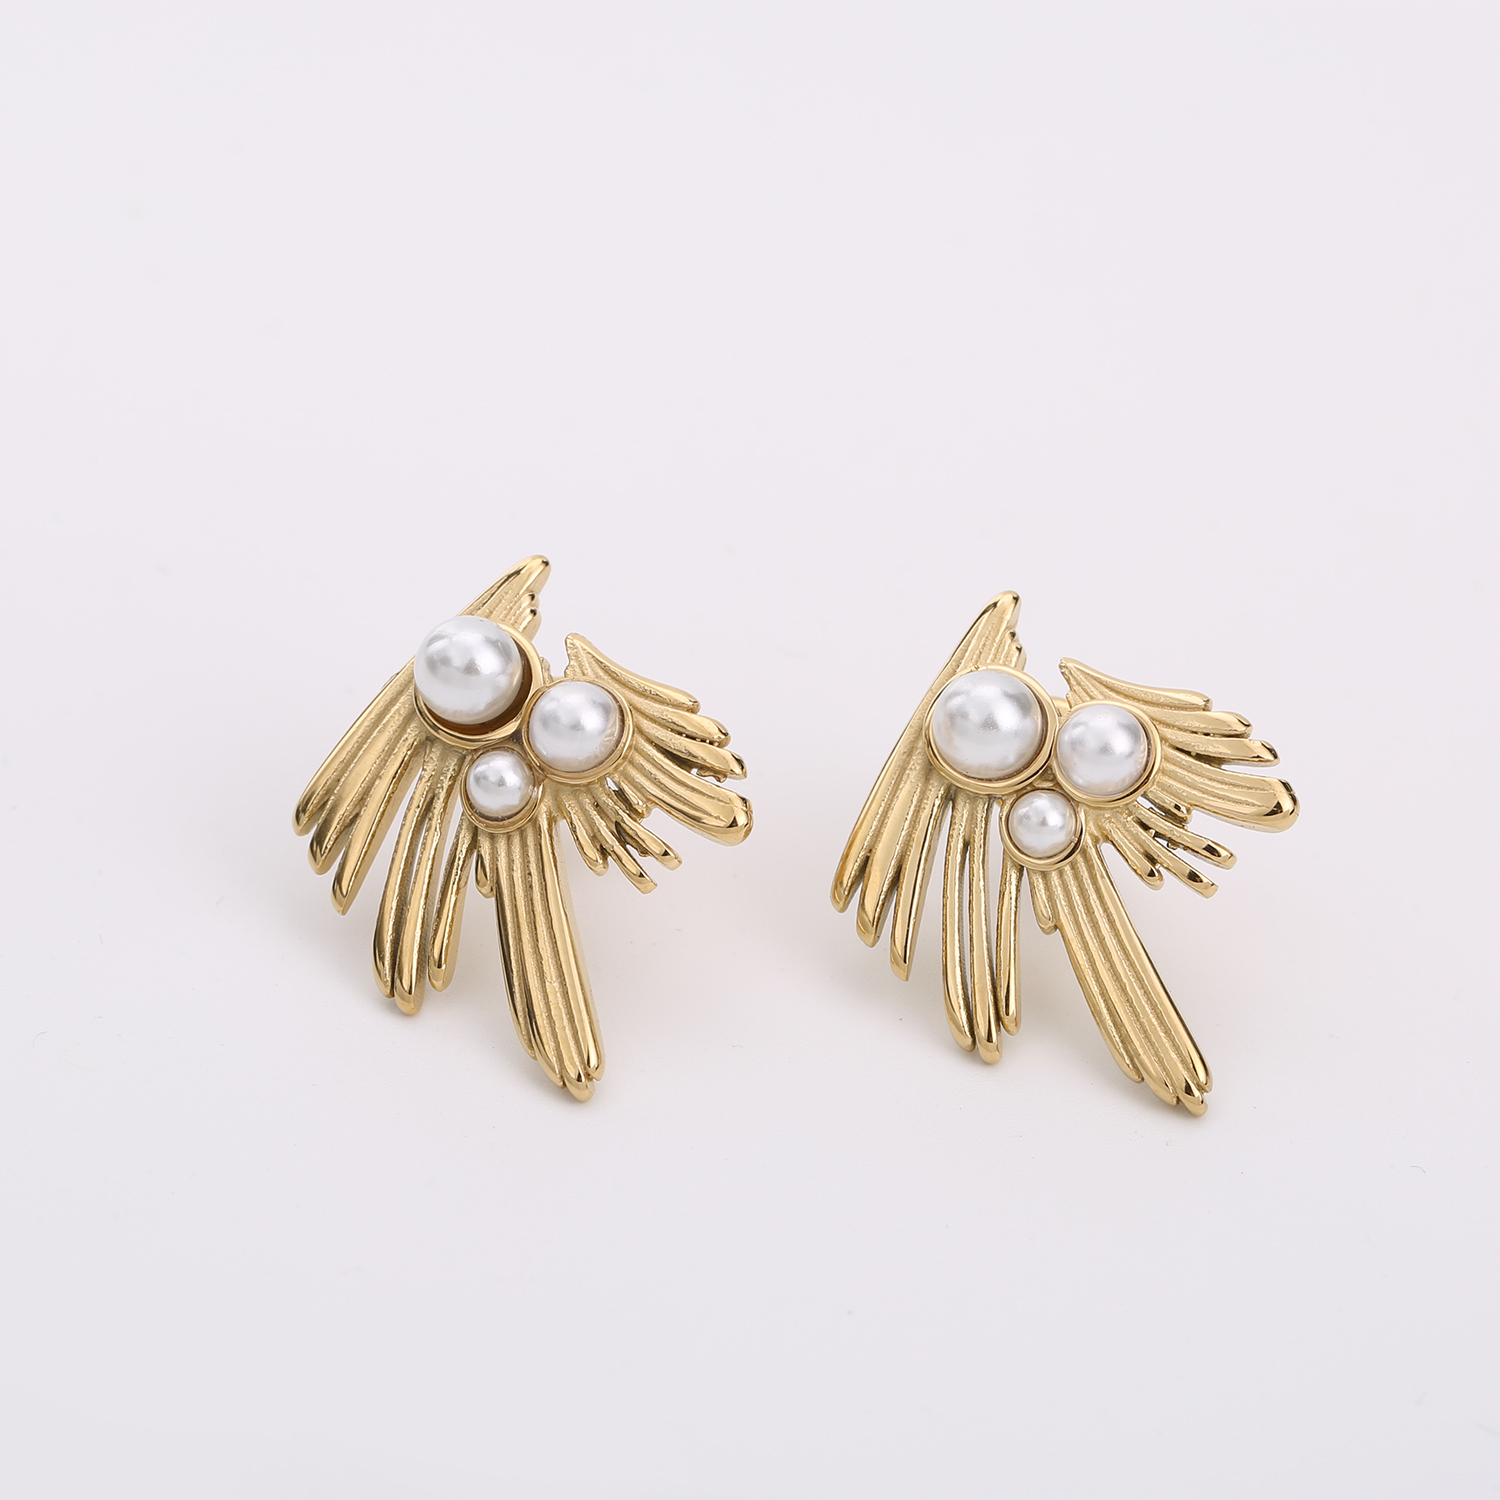 Pearl fashion earrings for the glamorous gilr